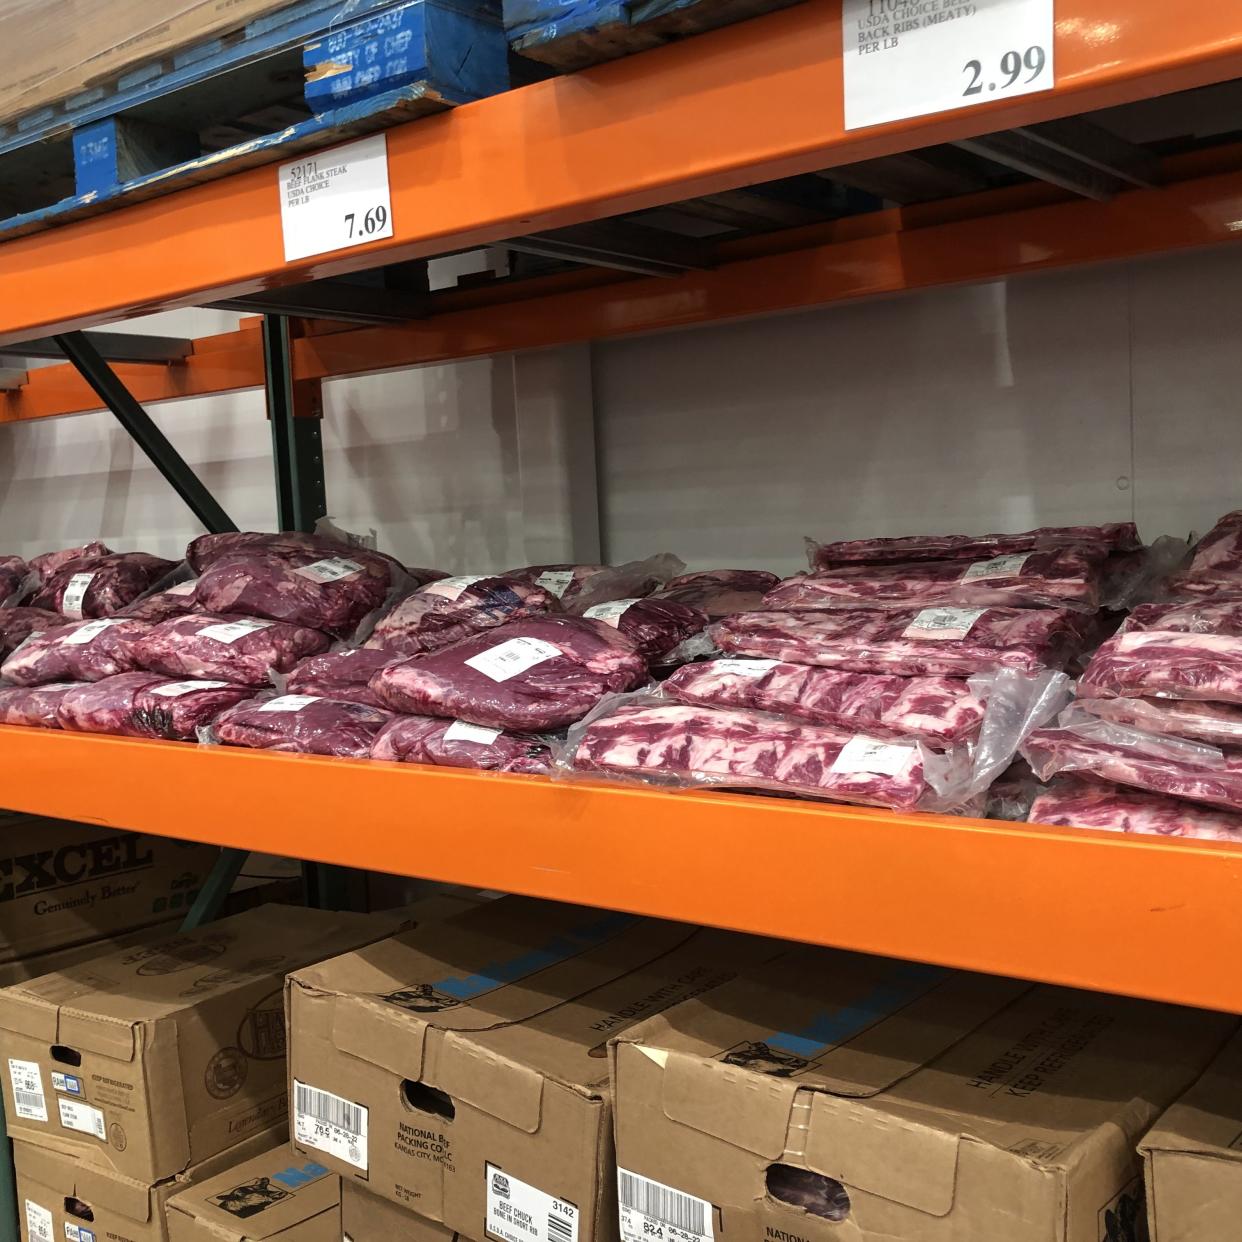 Rows of ribs and other packaged meats are shown at a Costco Business Center location.